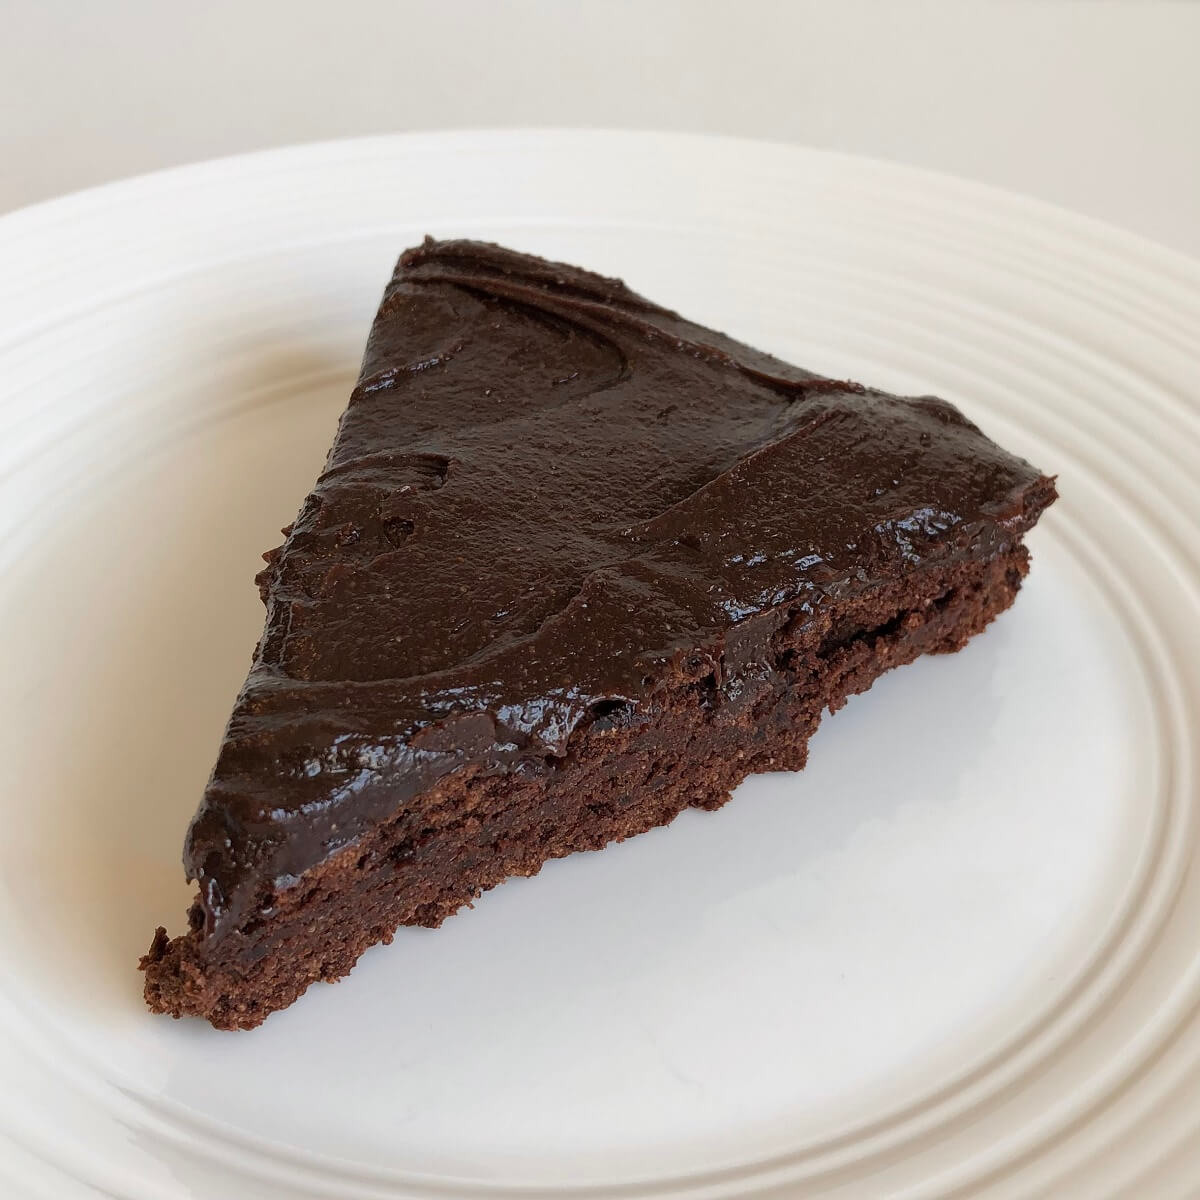 A slice of frosted chocolate black bean cake.